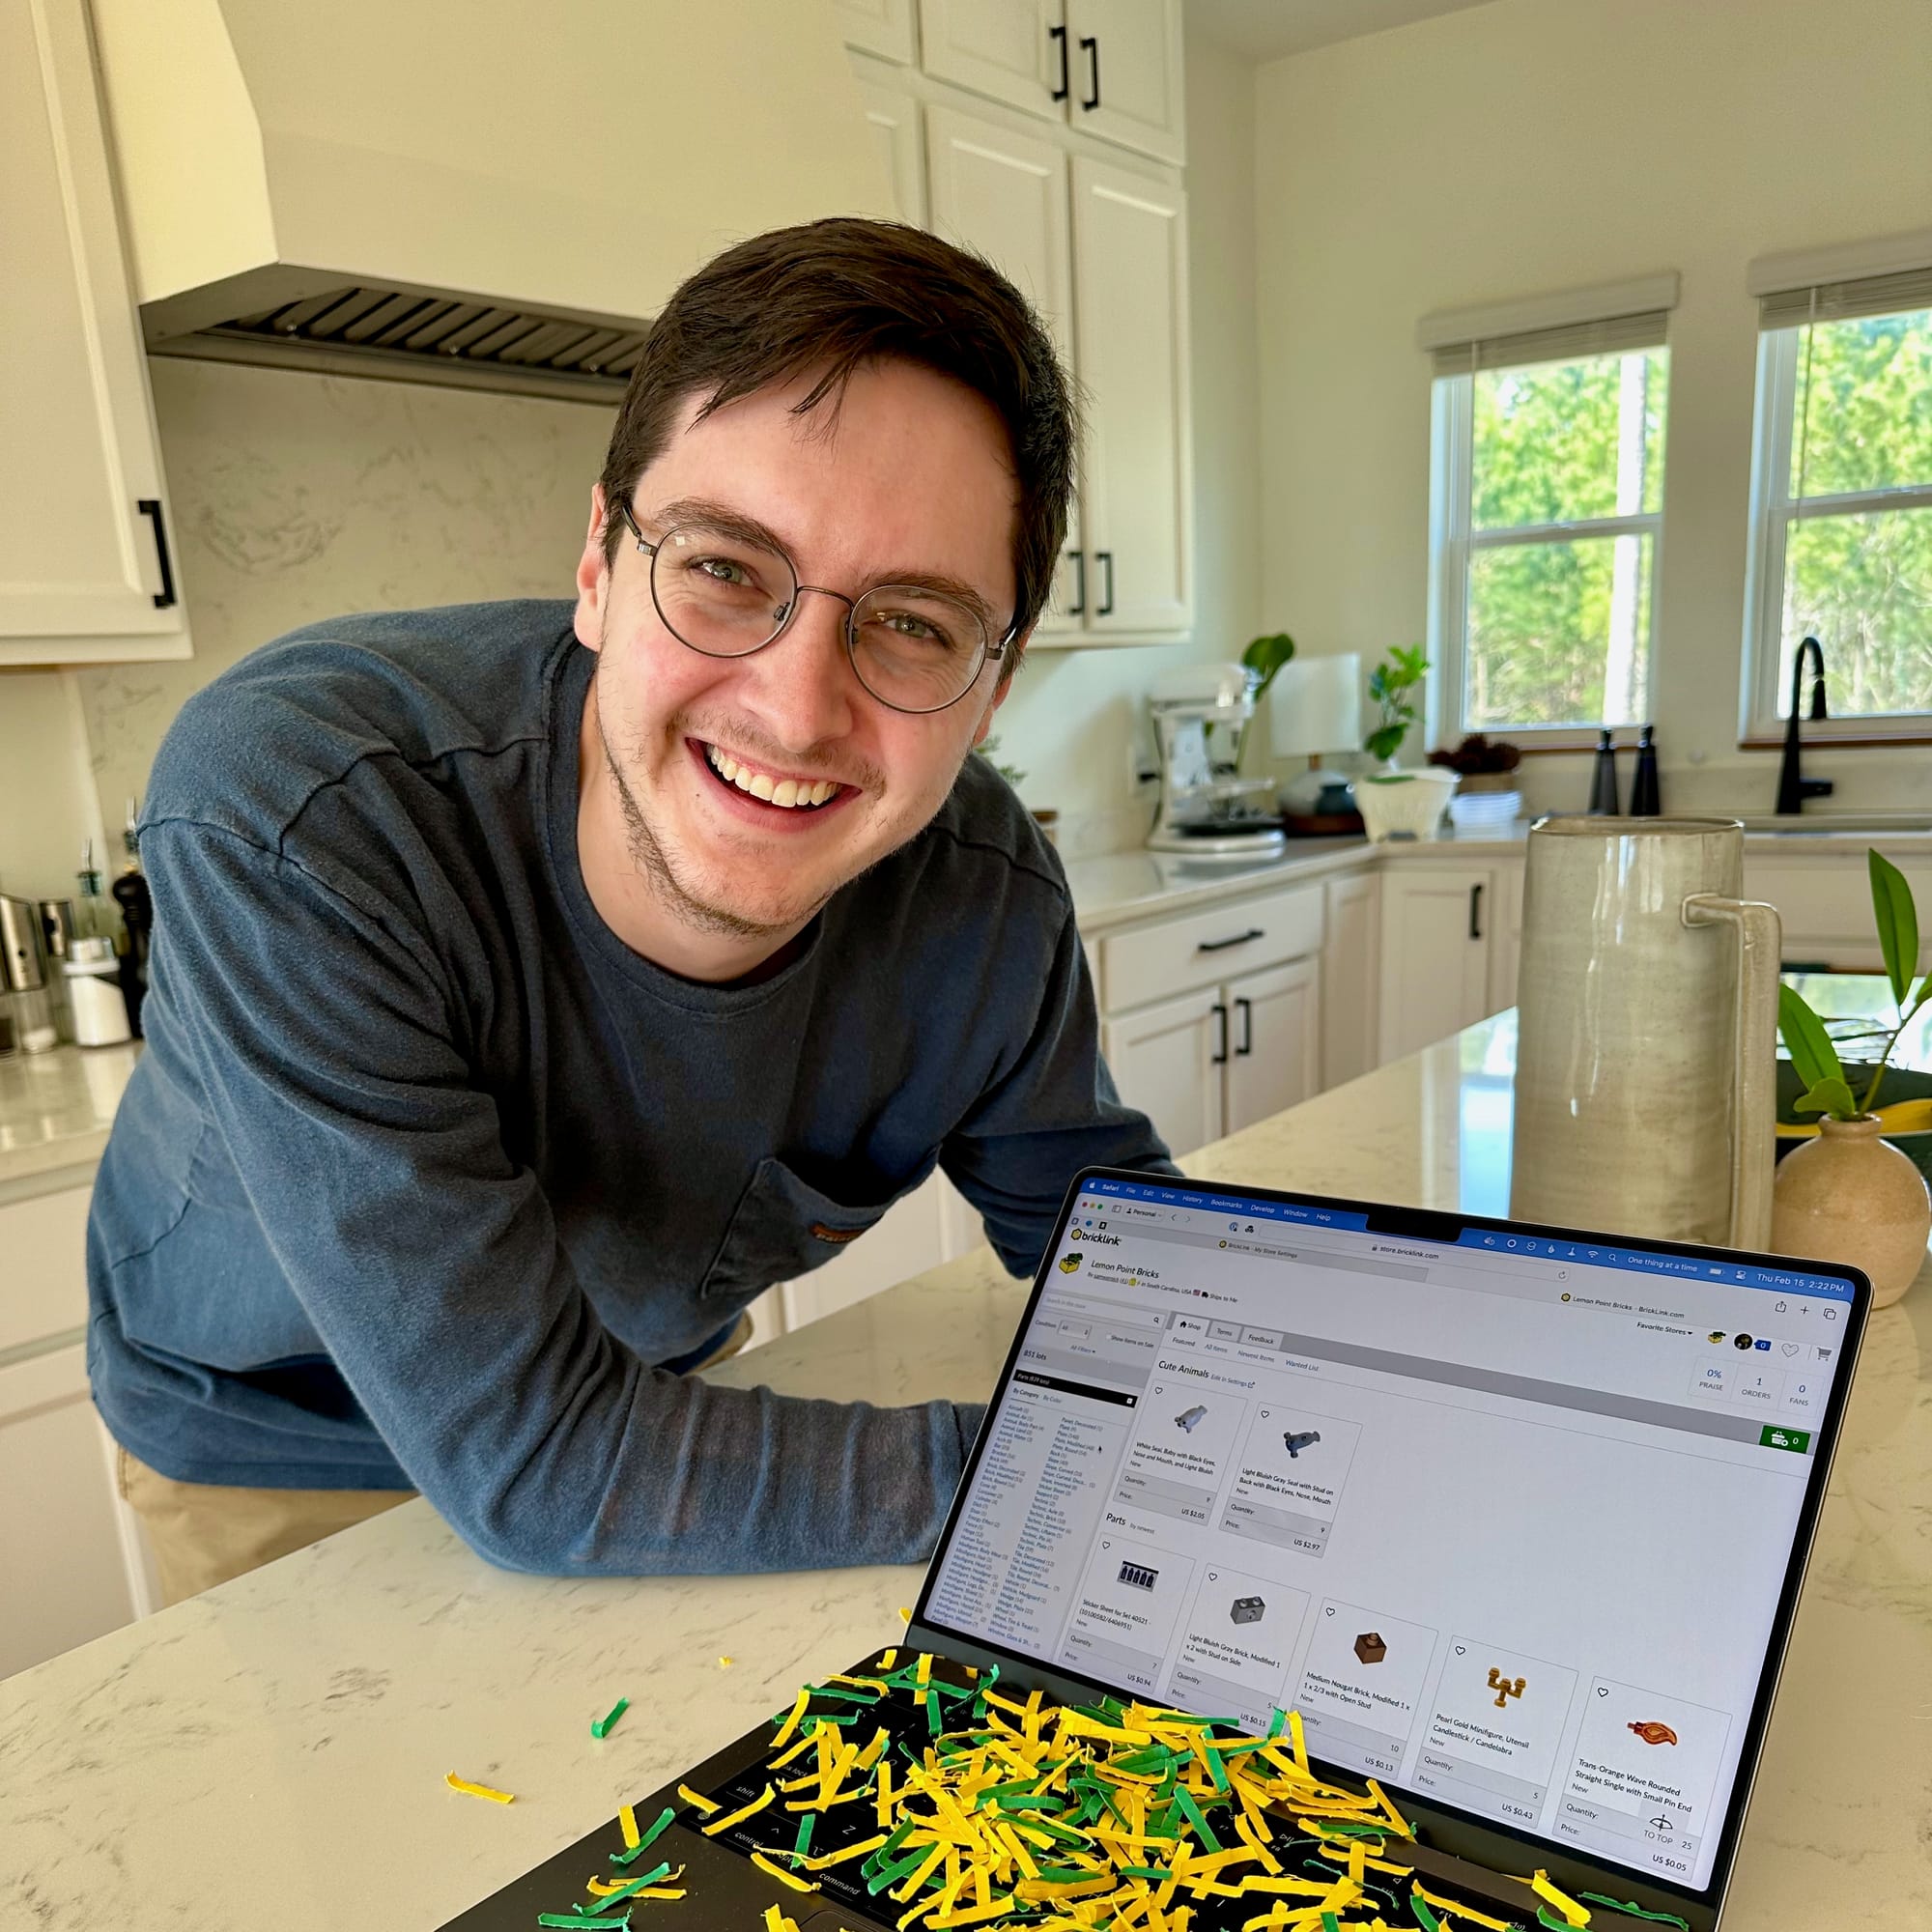 Man posing with laptop covered in yellow and green confetti showing a newly opened BrickLink store